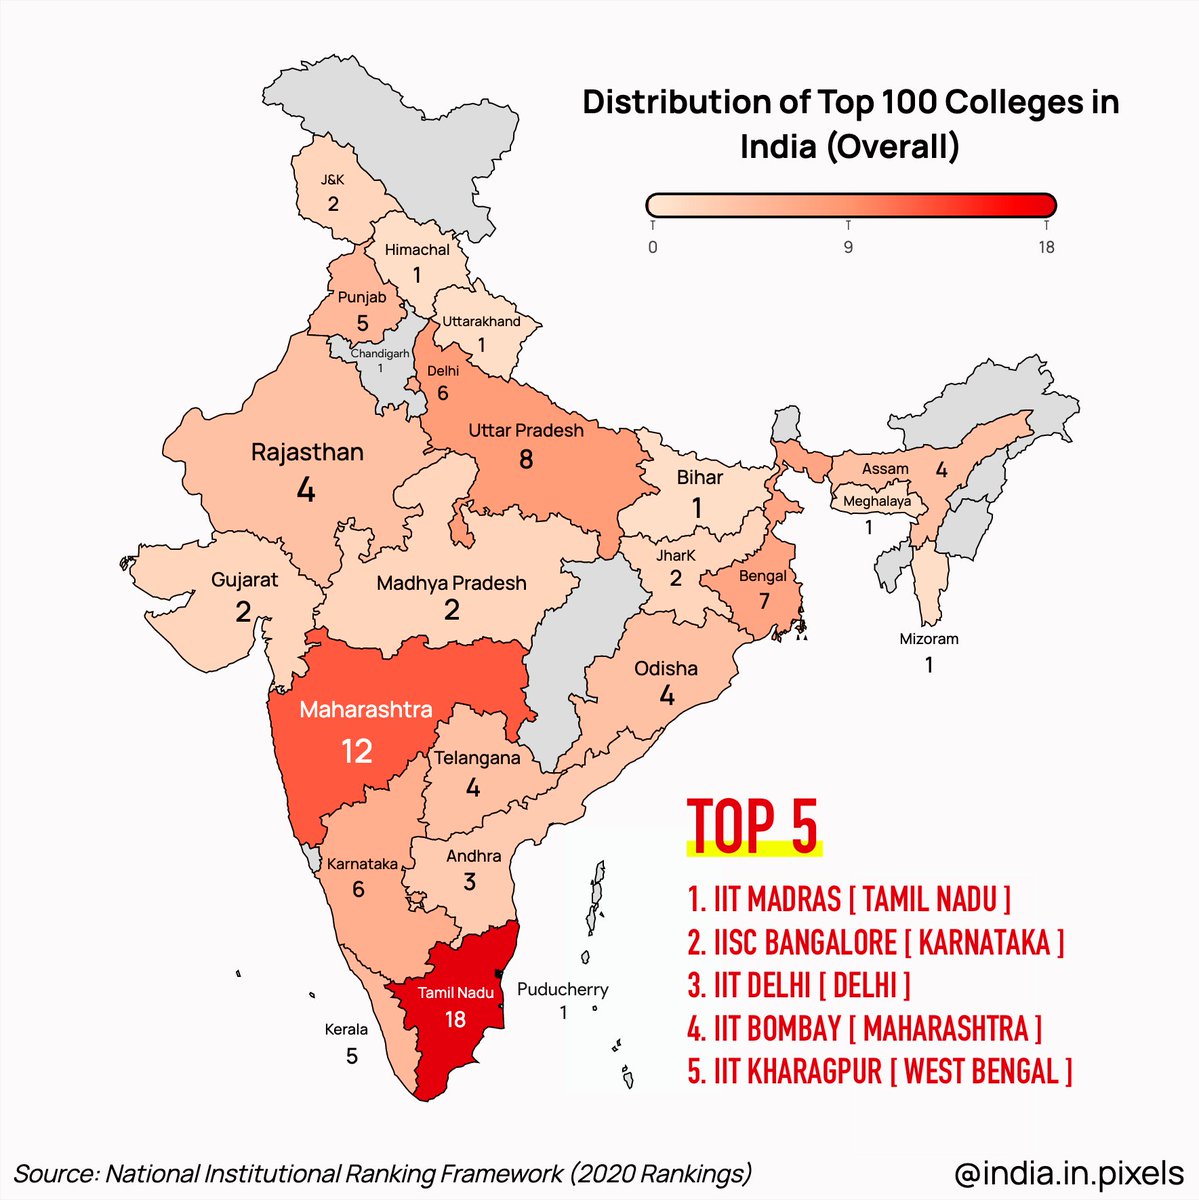 Distribution of Top 100 Overall Colleges and Universities in IndiaSource:  https://www.nirfindia.org/2020/OverallRanking.html